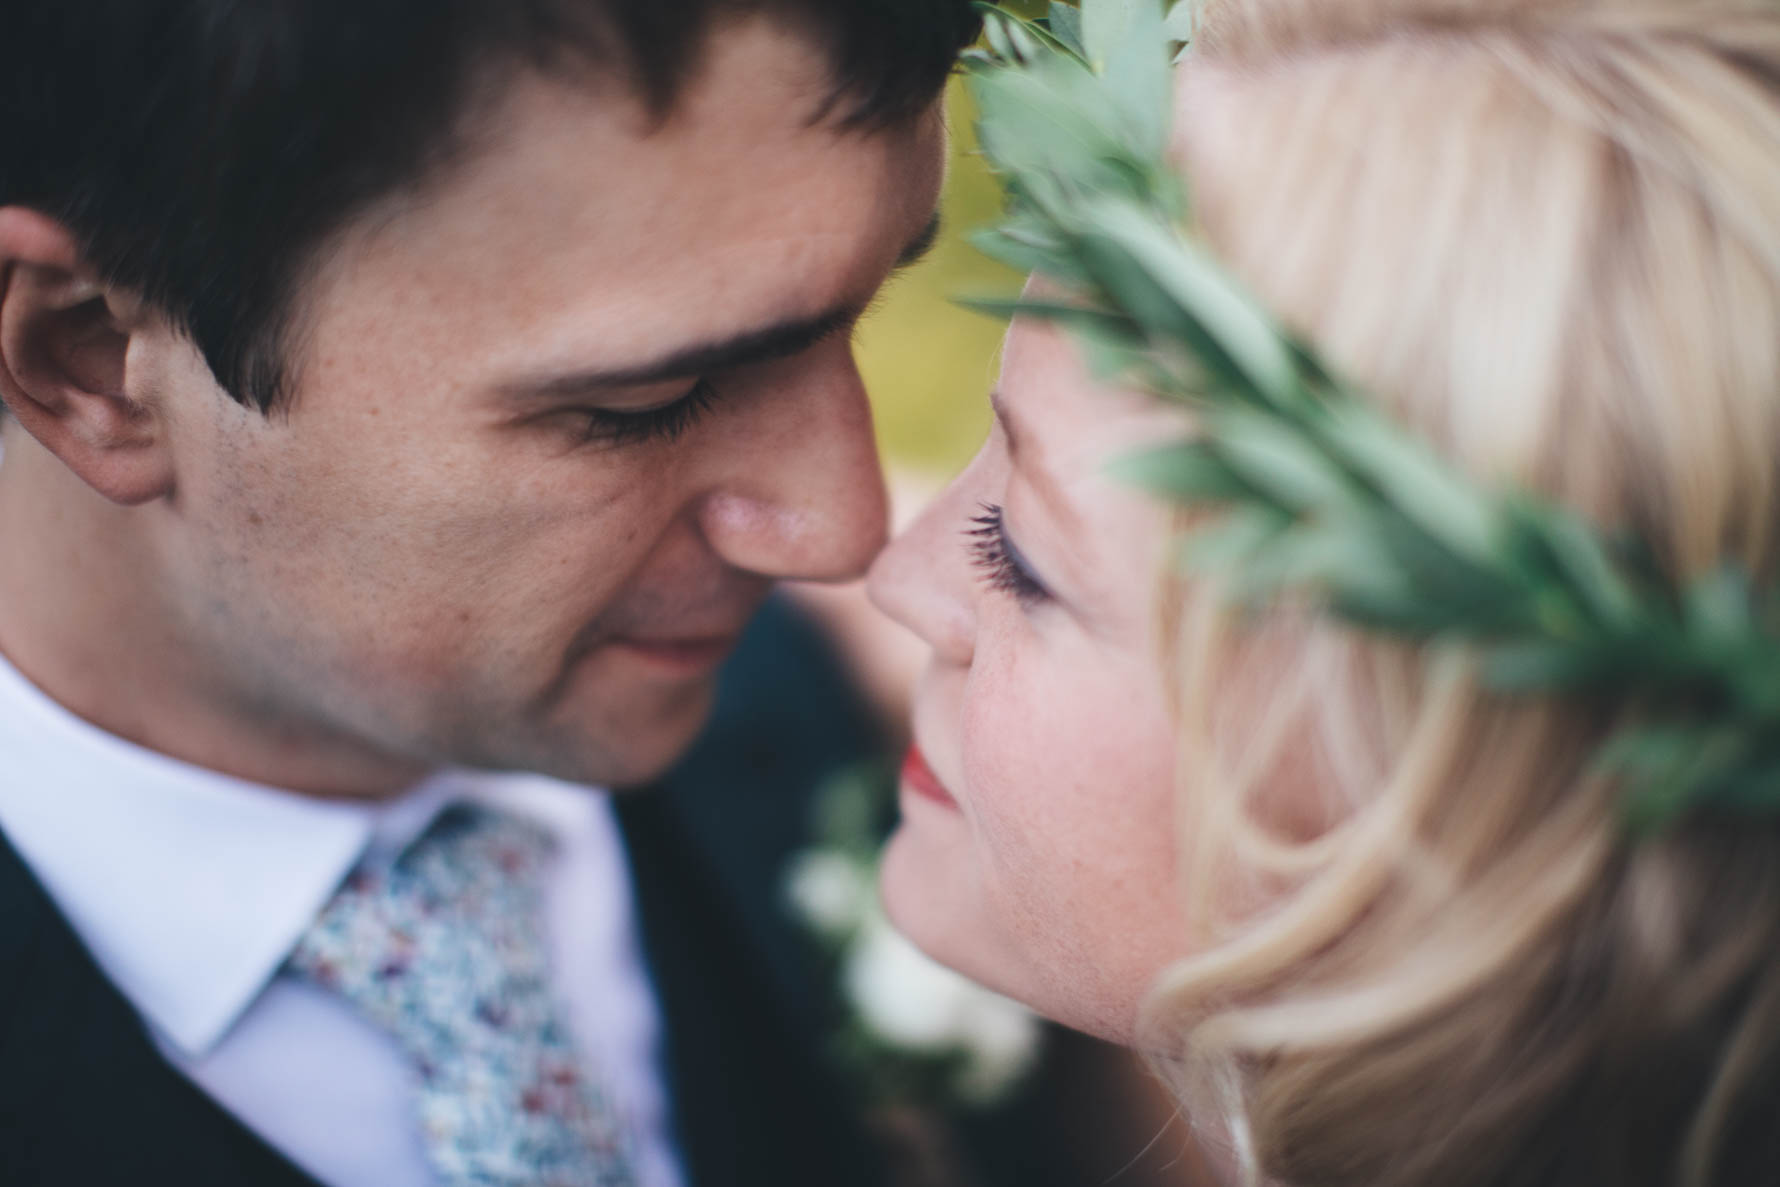 Close up of a bride and groom touching their noses together. The bride had a leaf garland around her head